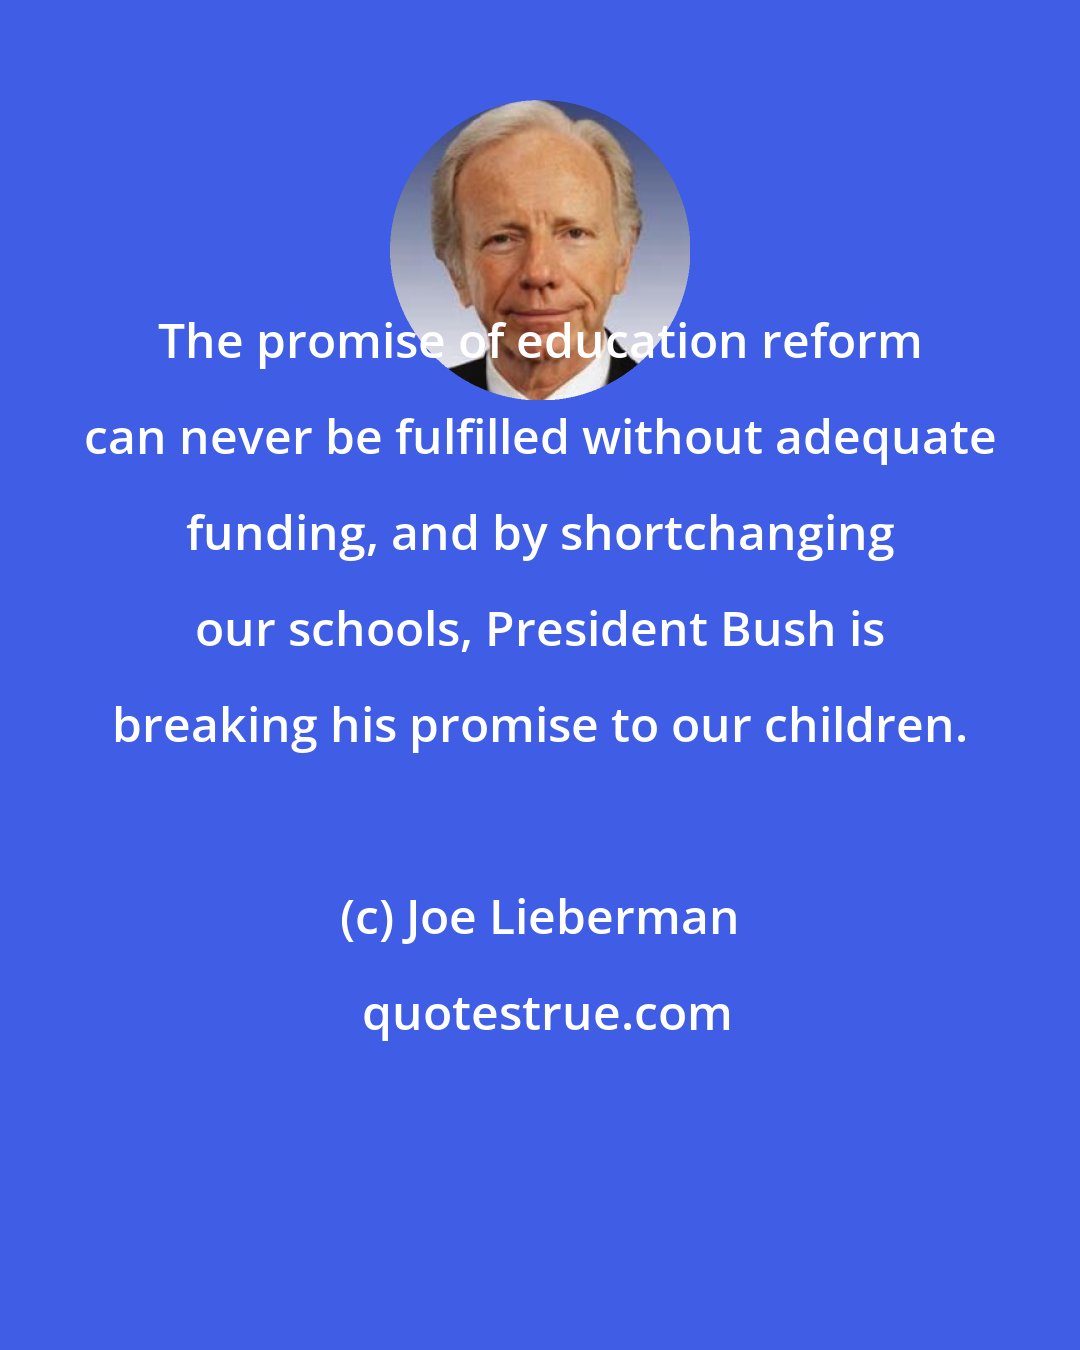 Joe Lieberman: The promise of education reform can never be fulfilled without adequate funding, and by shortchanging our schools, President Bush is breaking his promise to our children.